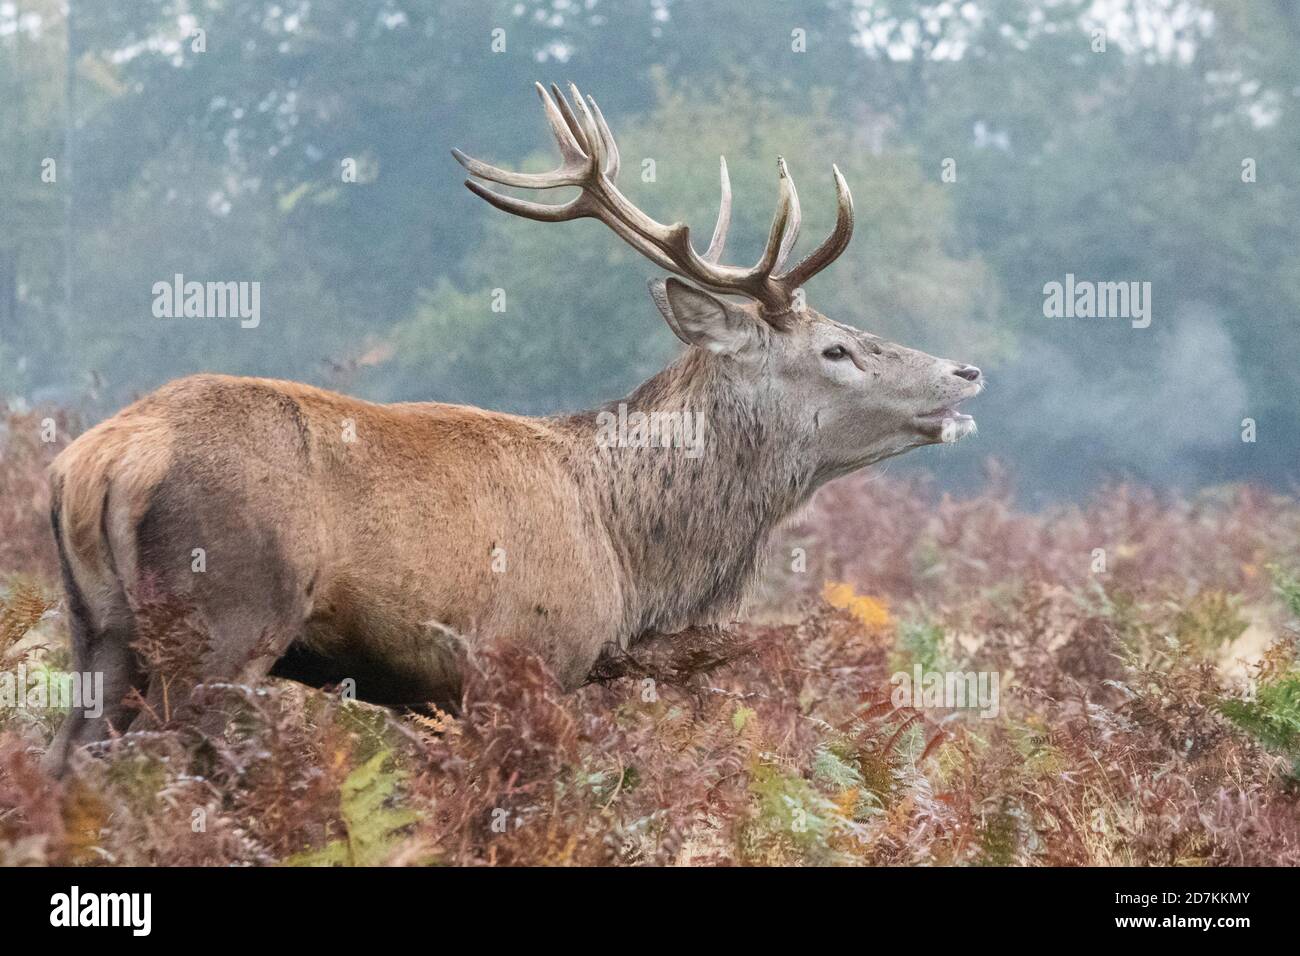 A red deer stag stands motionless in the Autumnal bracken in Bushy Park, West London, its moist breath visible in the cool early morning air. Stock Photo